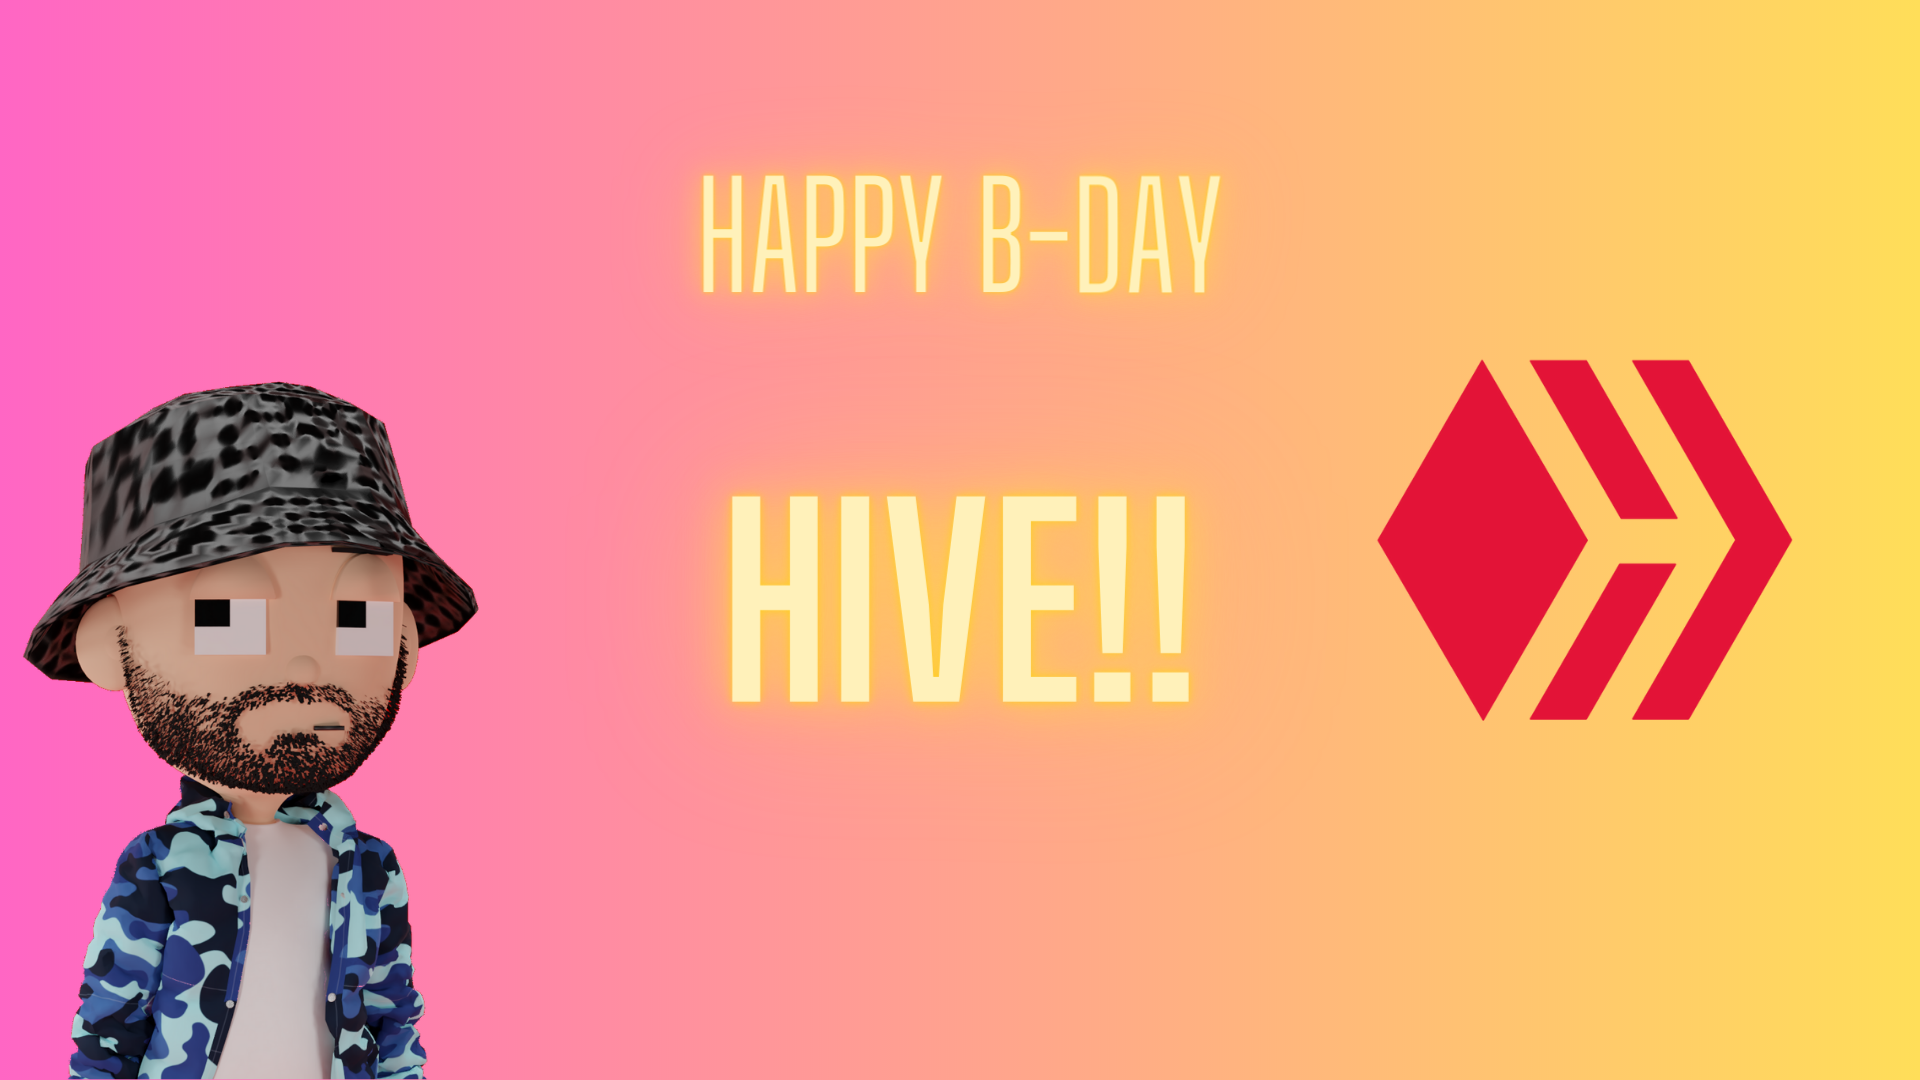 HIVE is turning 3 today!!!